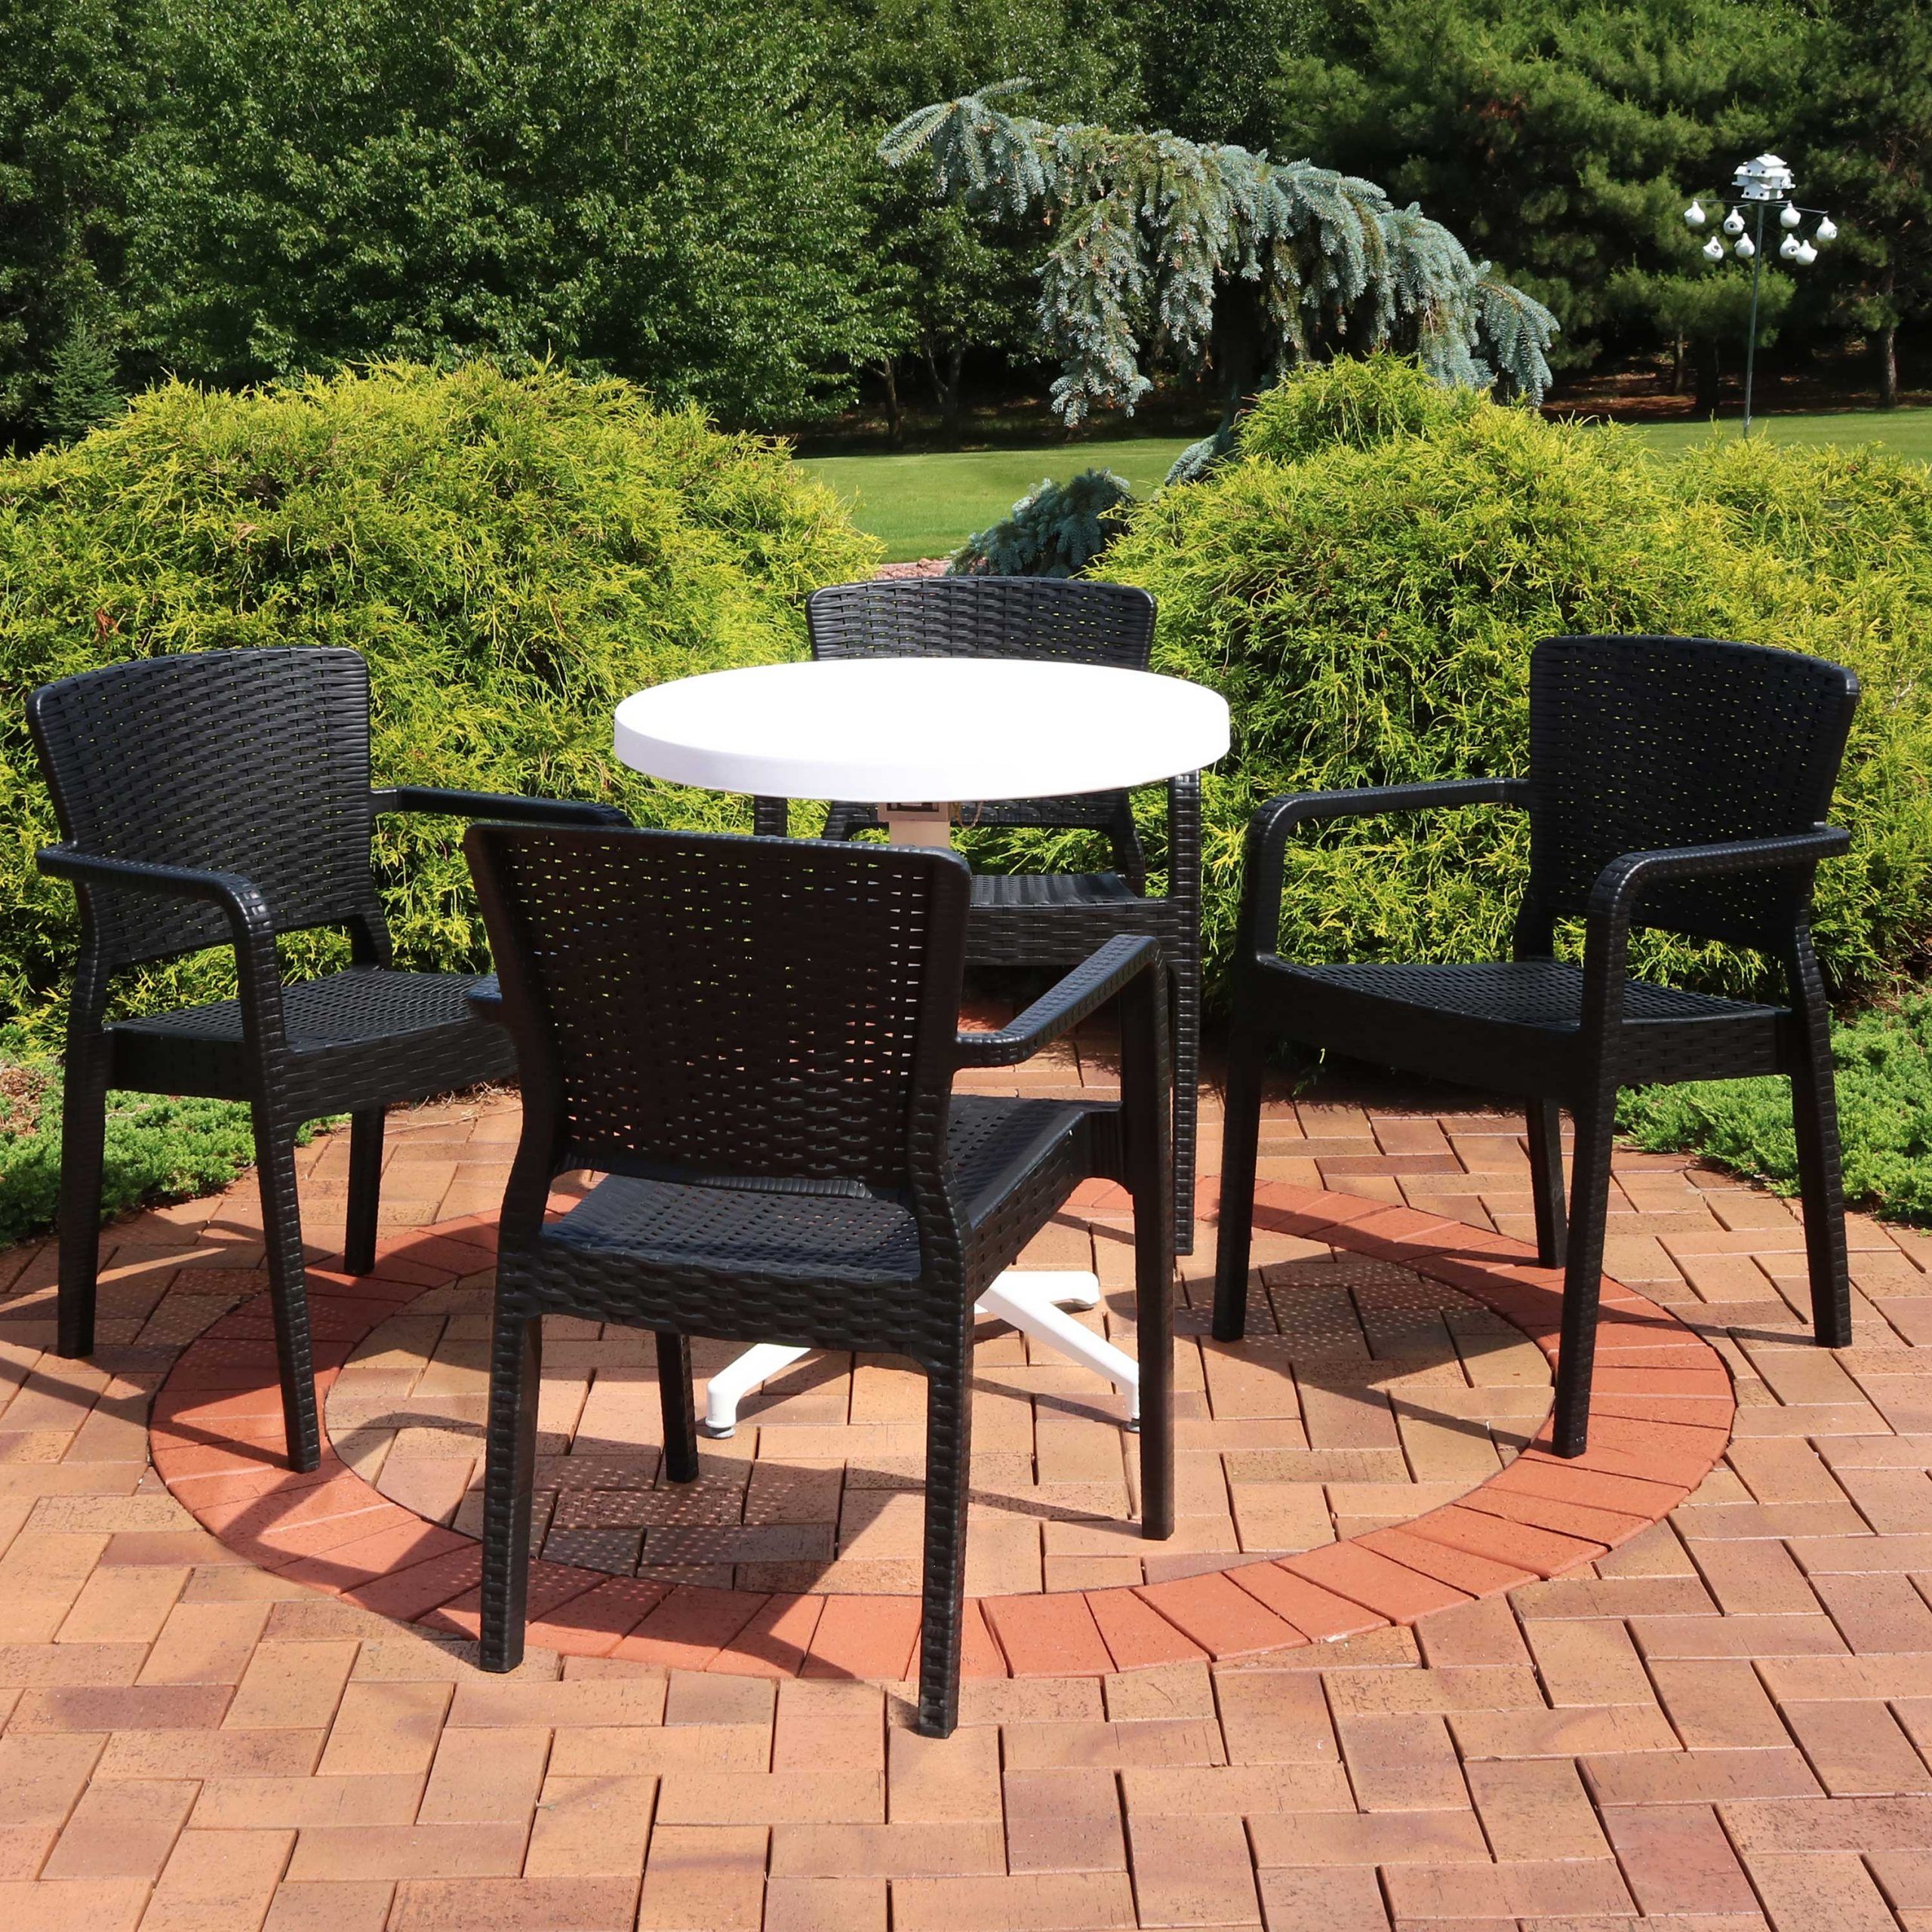 Sunnydaze All Weather Segonia Outdoor 5 Piece Patio Furniture Dining With Regard To Round 5 Piece Outdoor Patio Dining Sets (View 8 of 15)